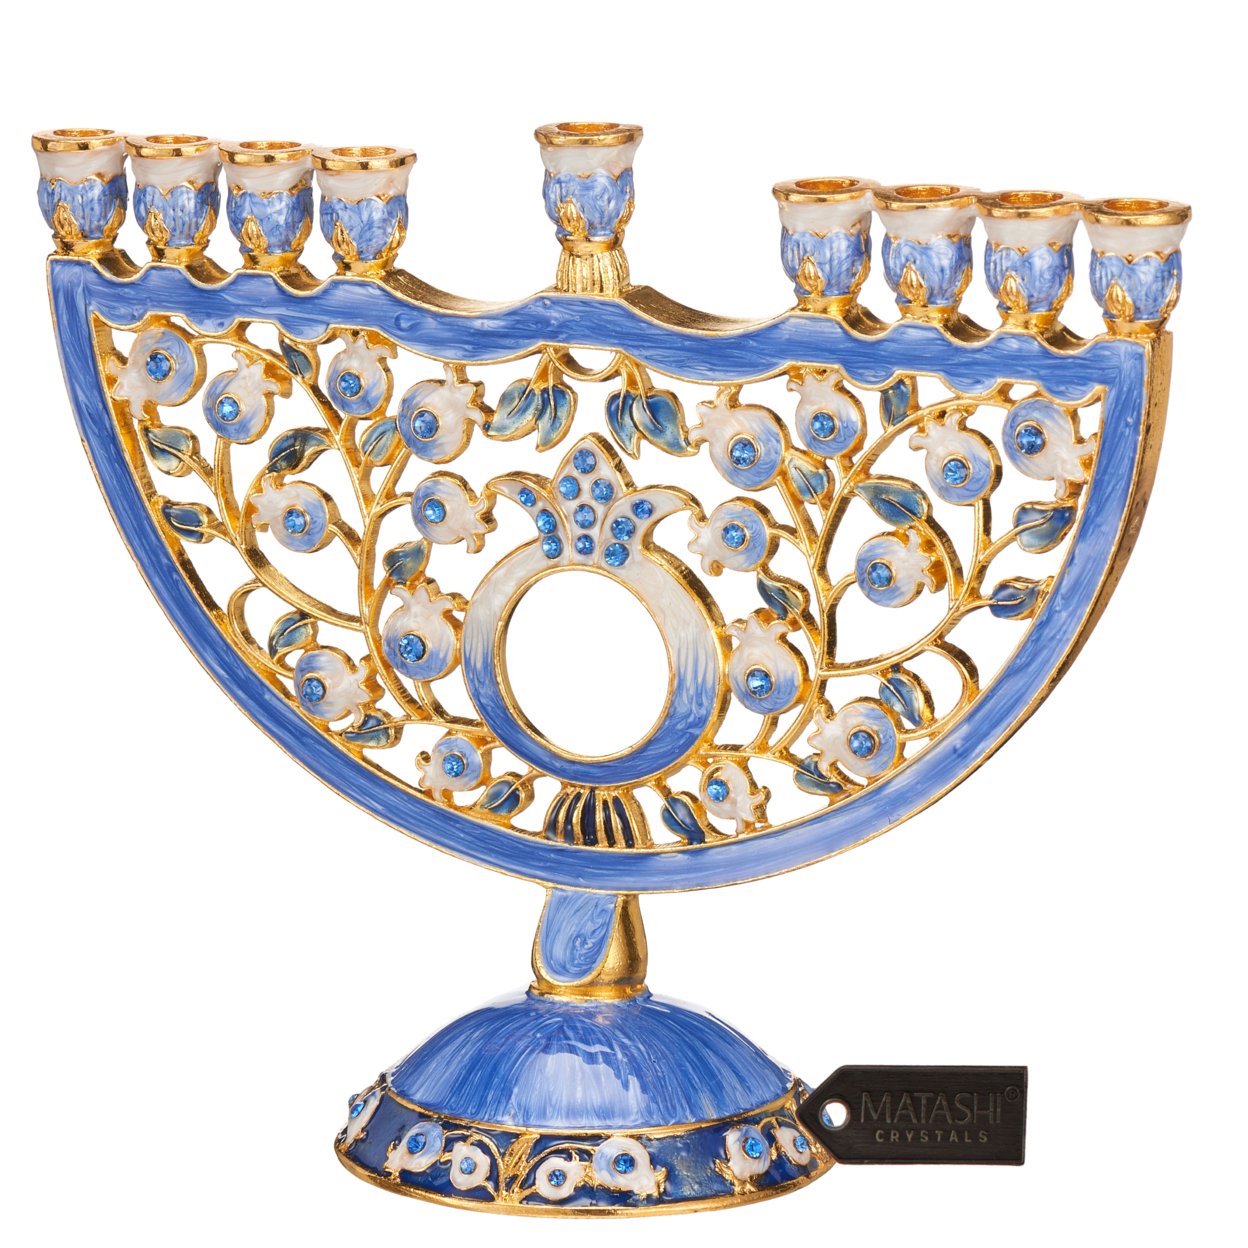 Matashi Hand Painted Blue Enamel Pomegranate Design Menorah Candelabra With Gold Accents And Crystals Jewish Candle Holder Hanukkah Gift